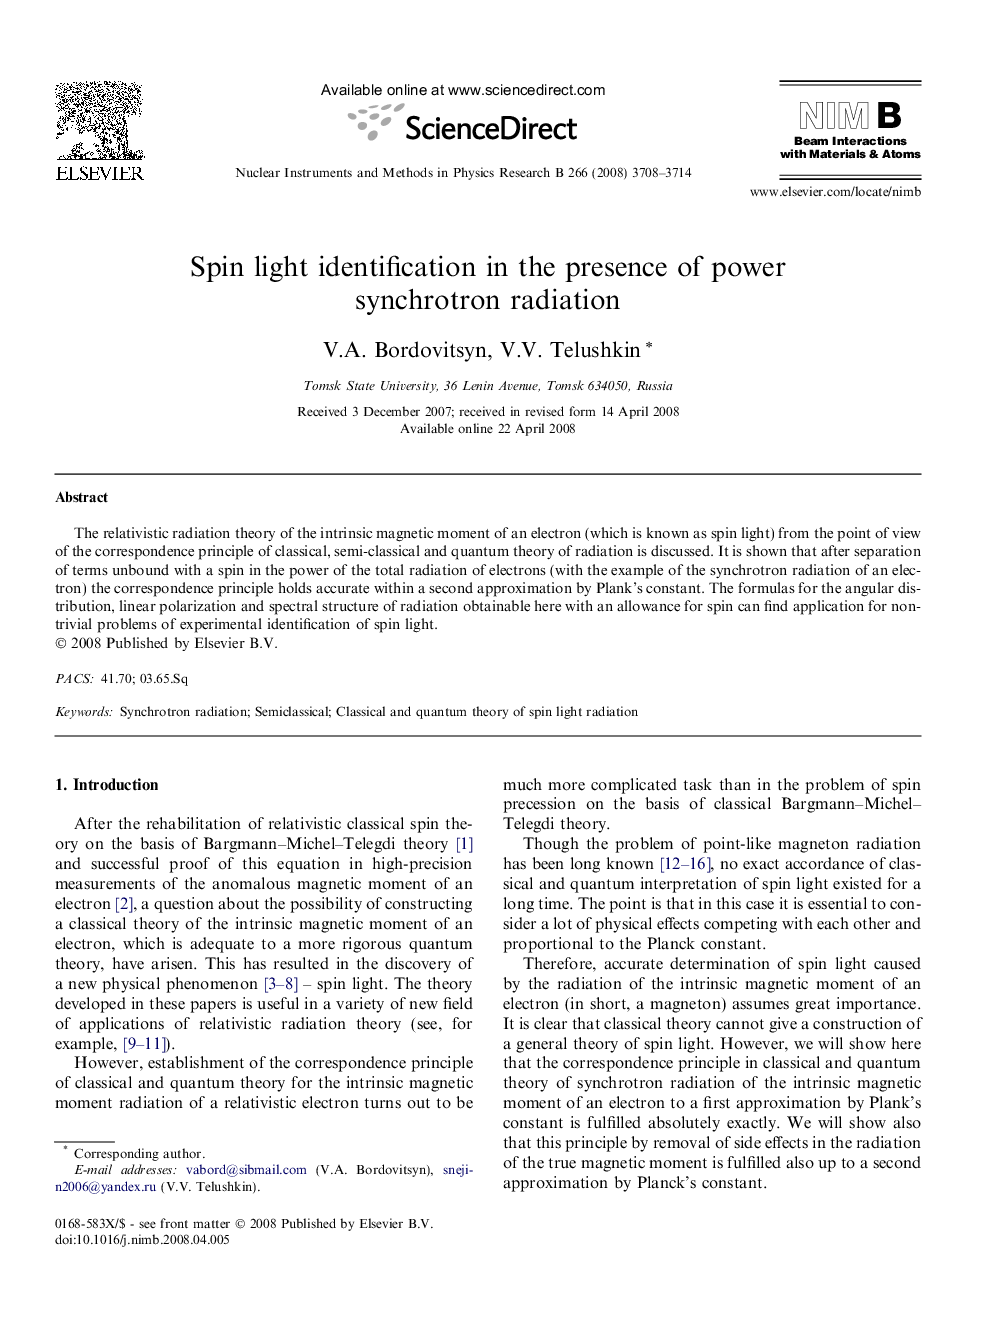 Spin light identification in the presence of power synchrotron radiation